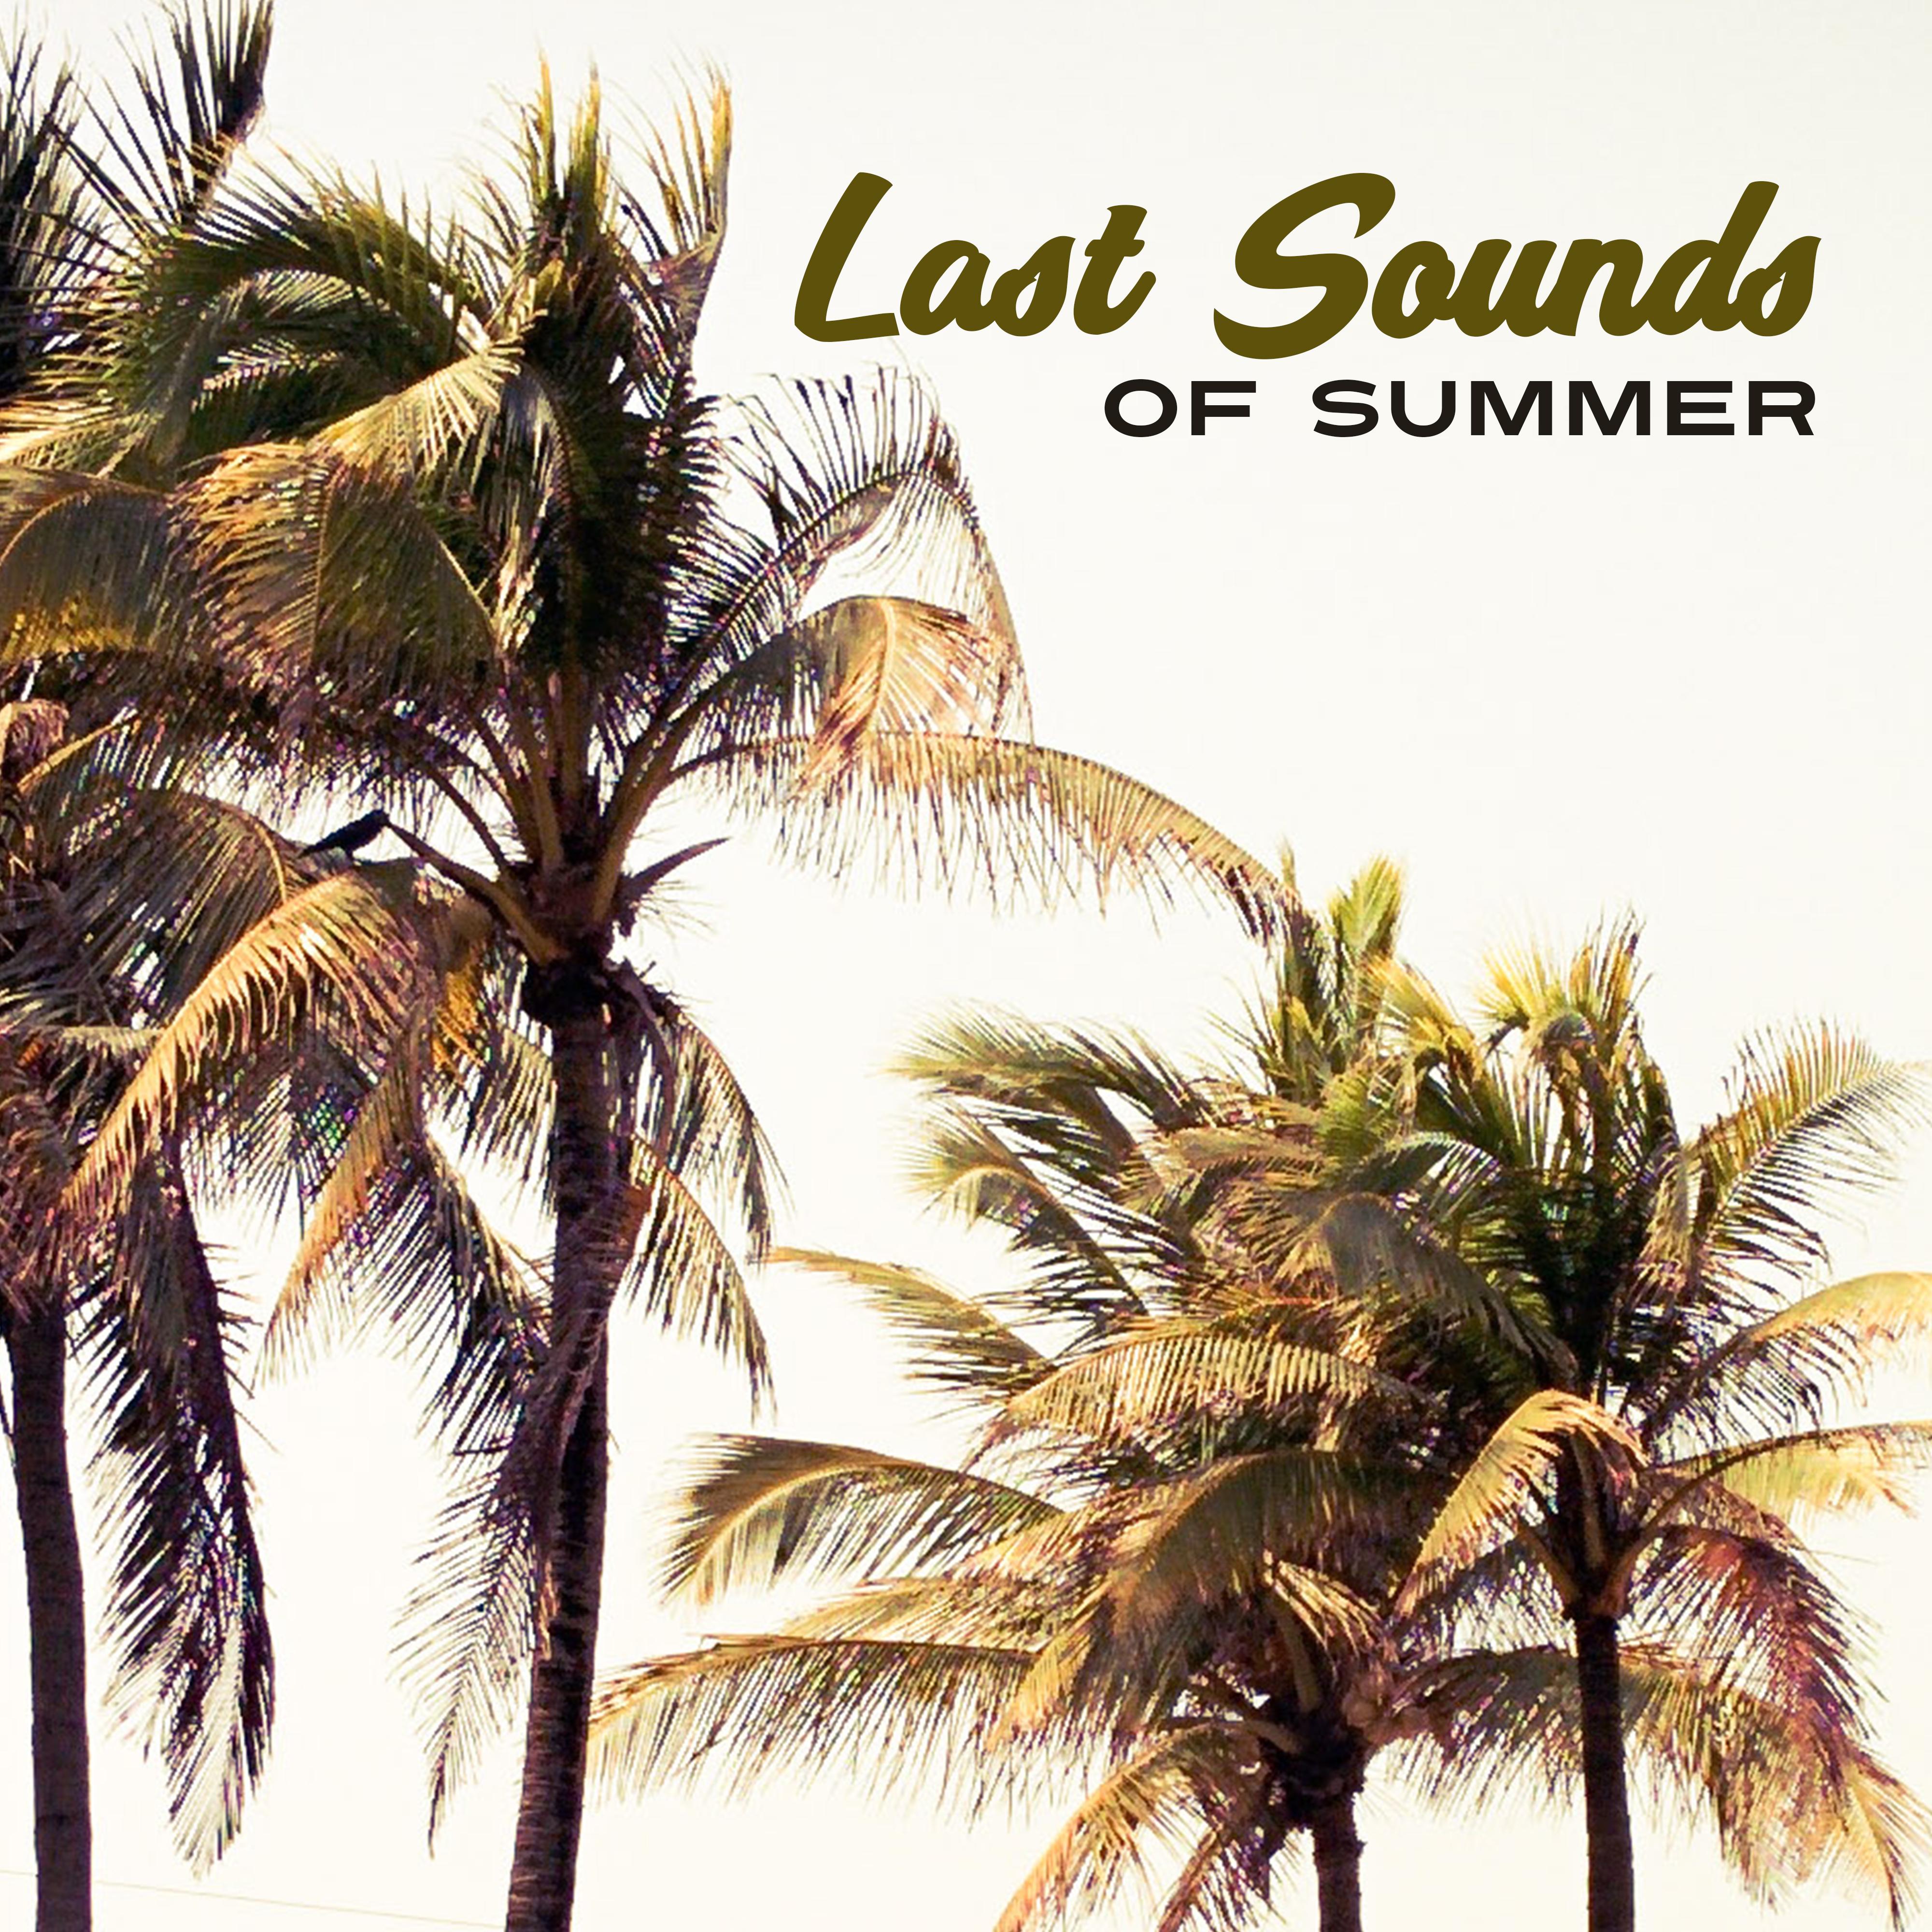 Last Sounds of Summer – Summer Music, Chillout 2017, Relax, Top Hits, Cafe Music, **** Vibes,